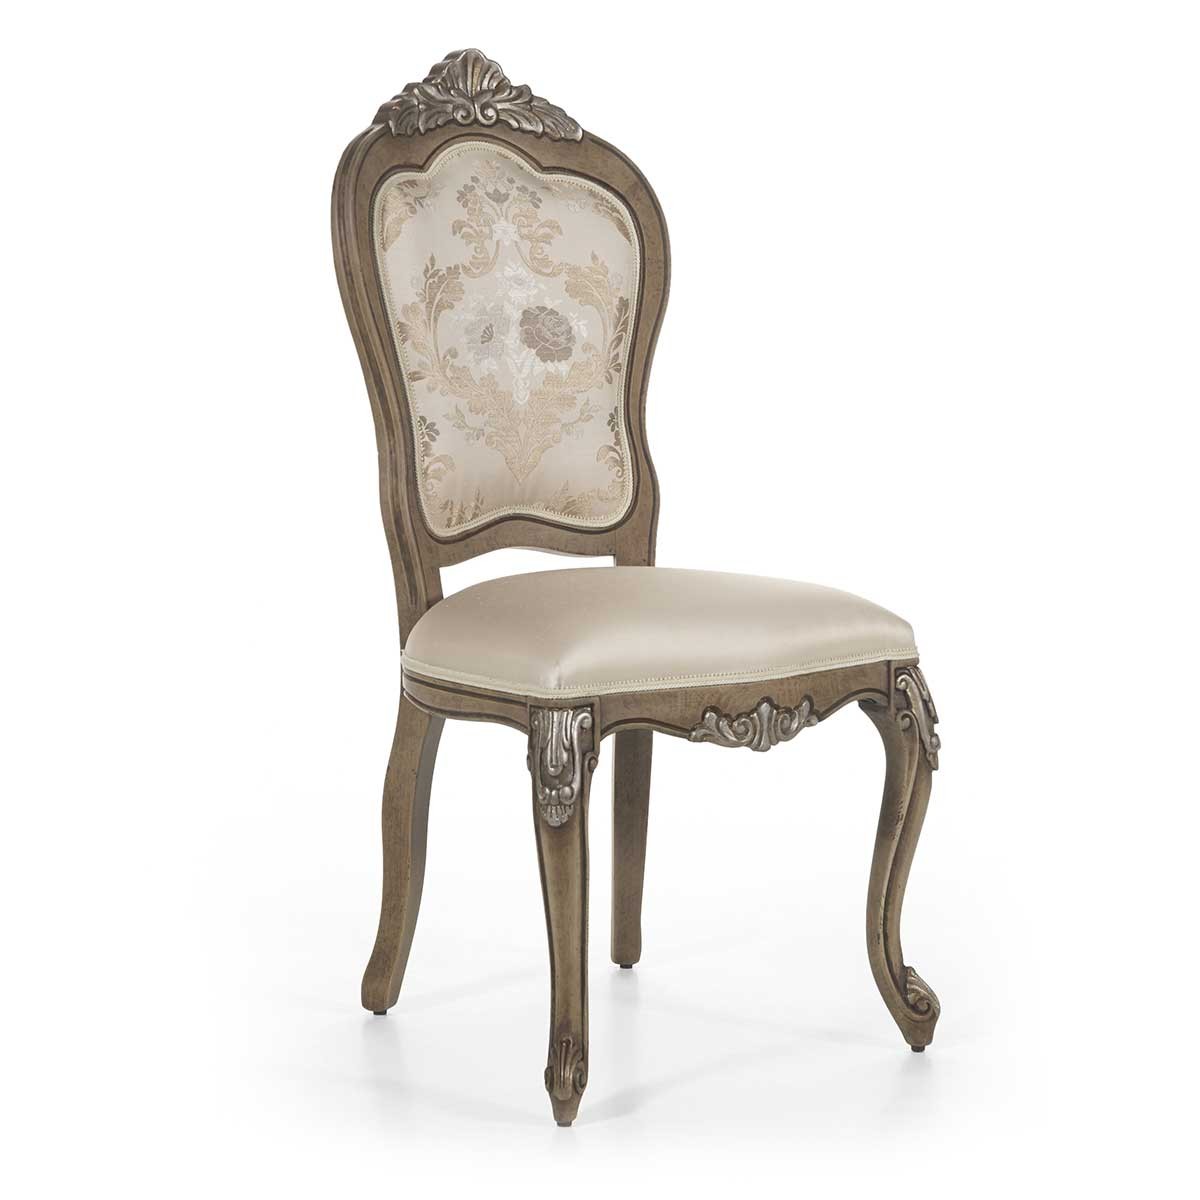 White classic chair CRESTA by Sevensedie in baroque style